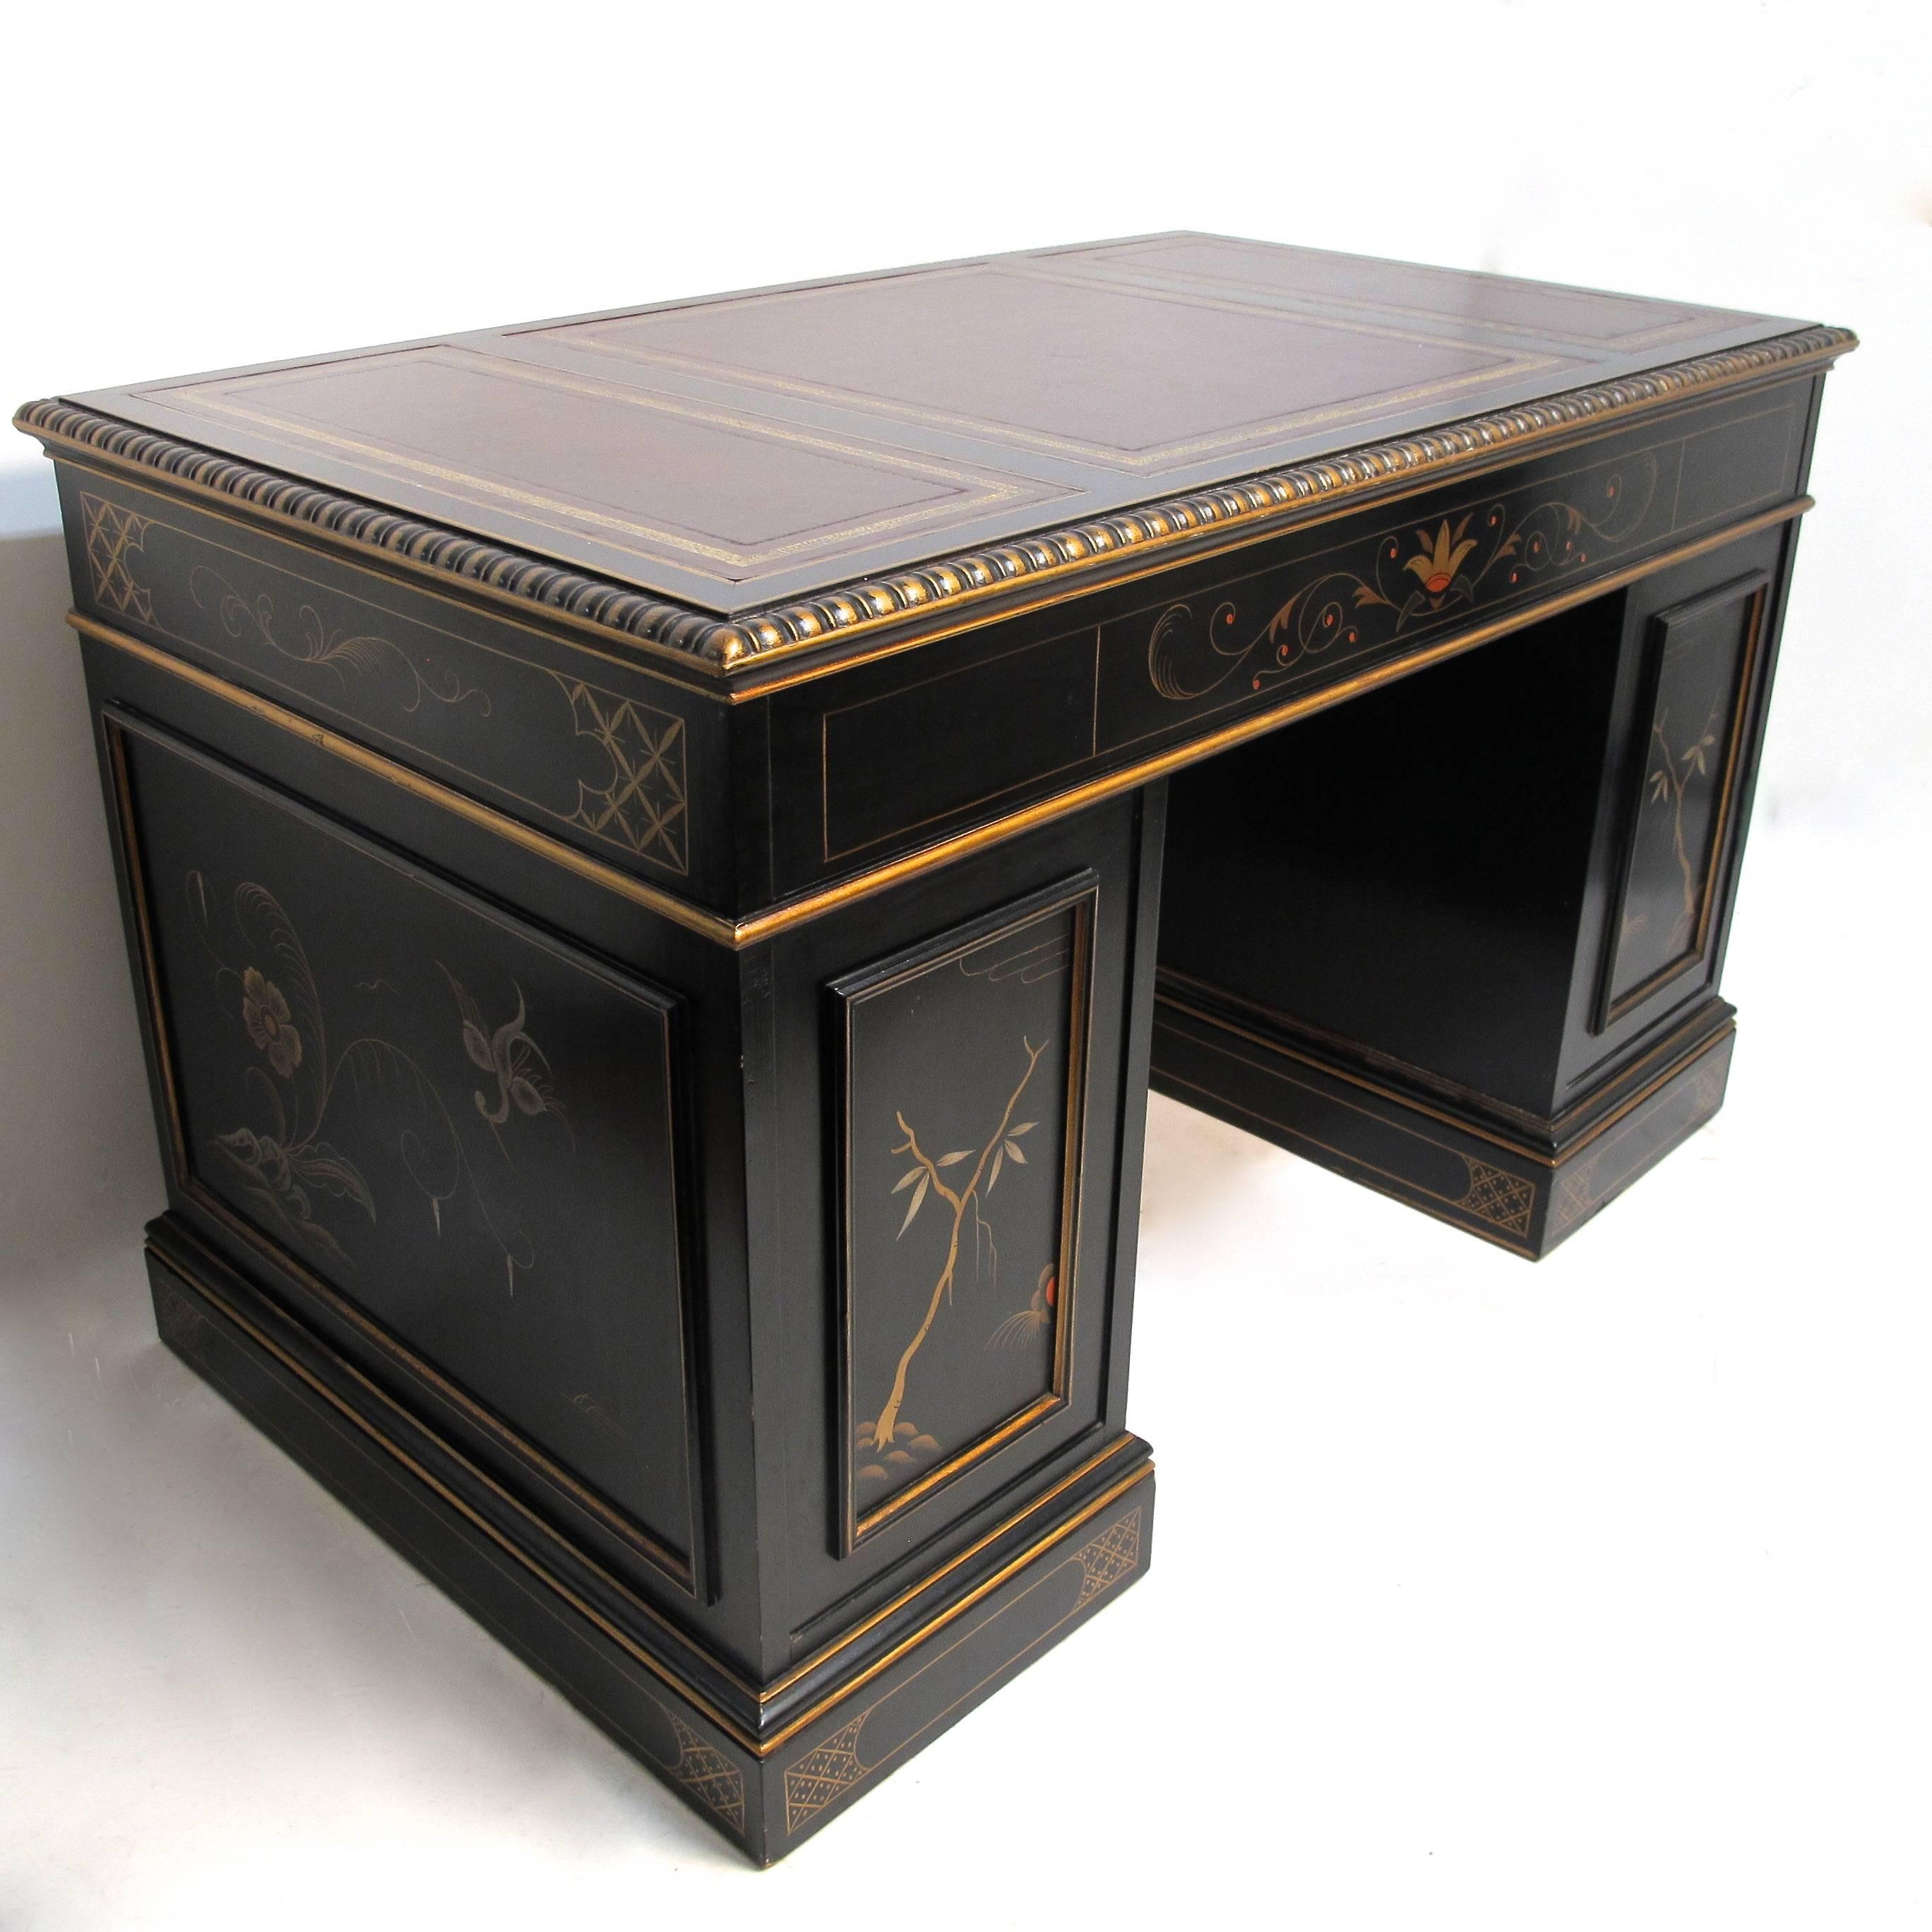 Late 20th Century Painted and Chinoiserie Decorated Pedestal Desk, Last Quarter of 20th Century